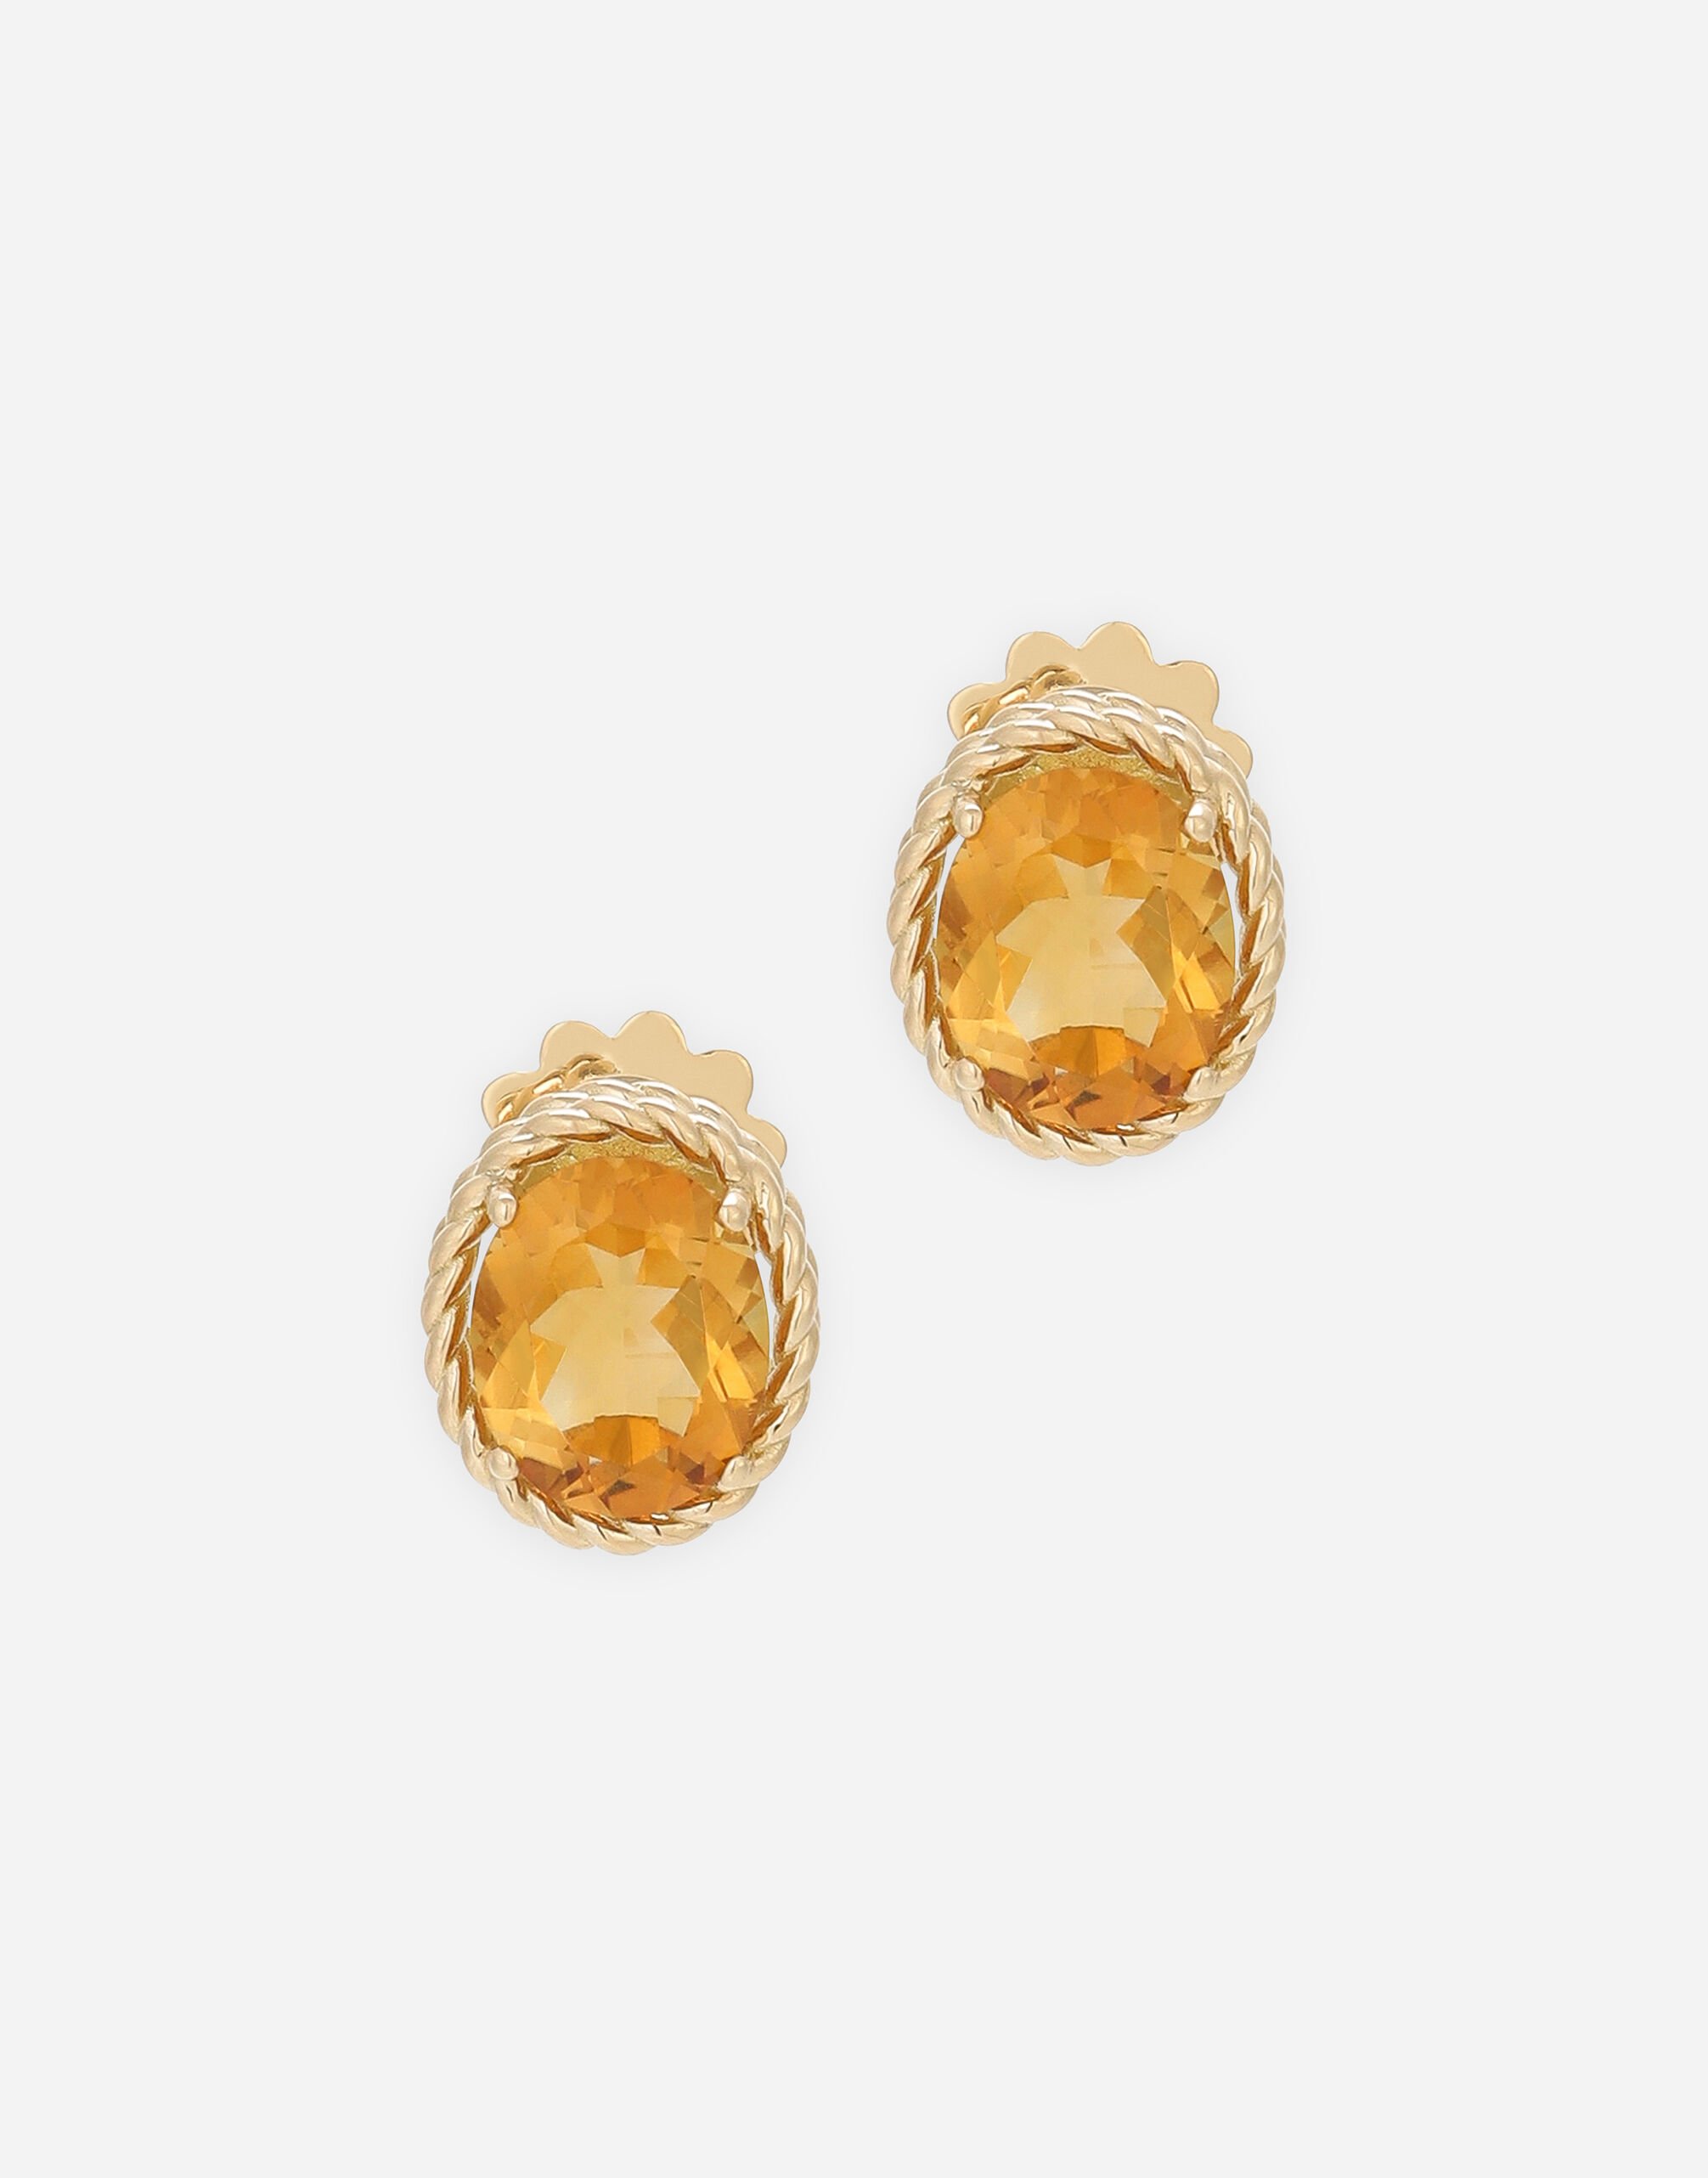 Dolce & Gabbana Anna earrings in yellow gold 18kt with citrines White WSQA1GWTSQS